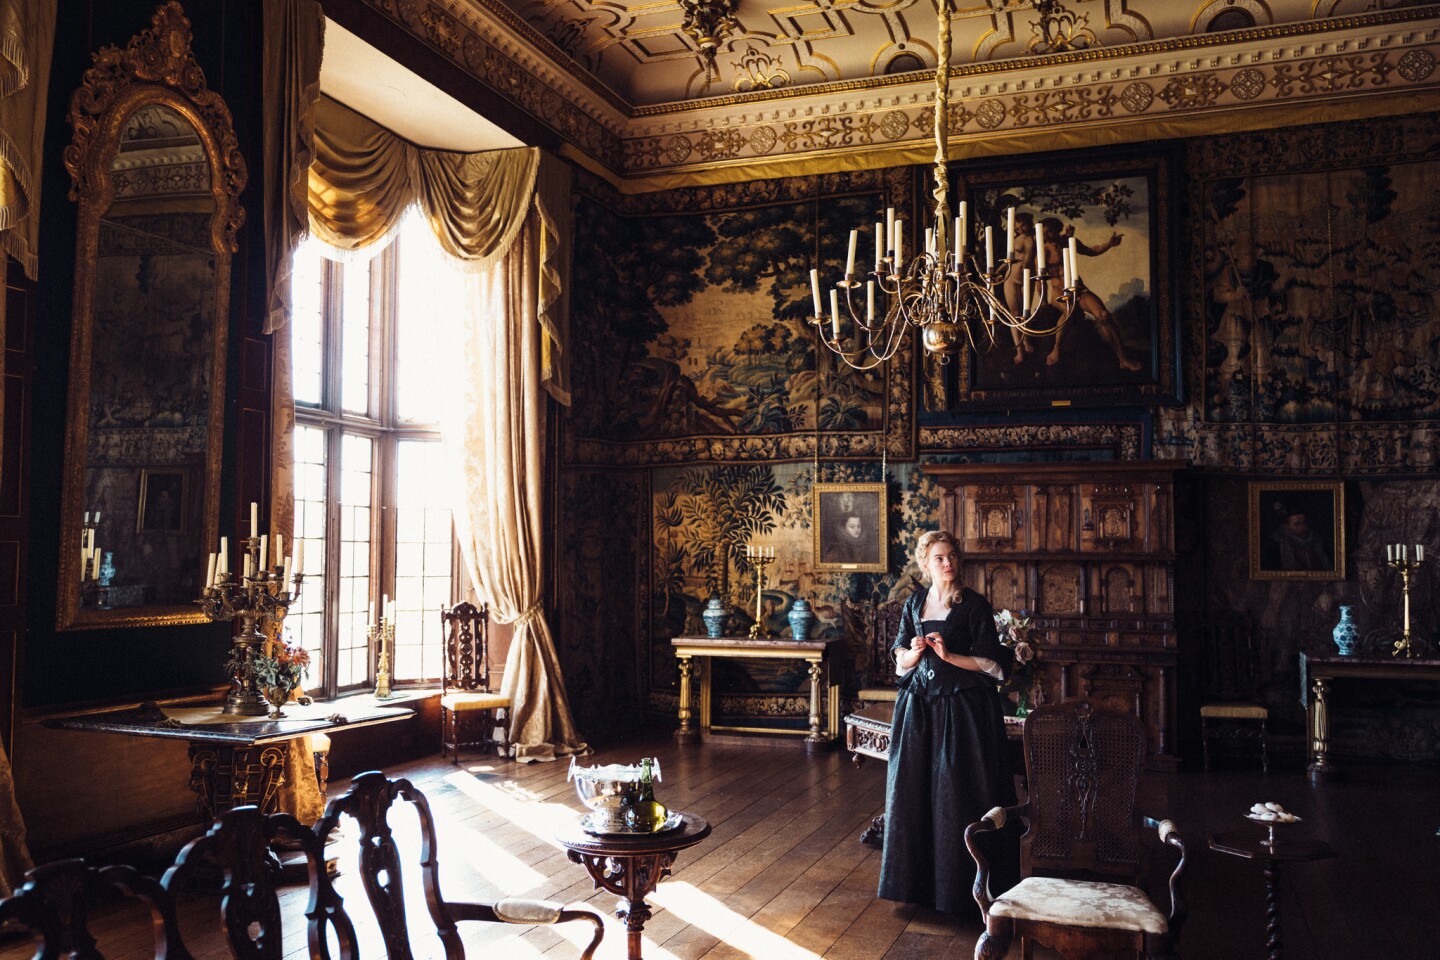 Interior production design from "The Favourite" movie by production designer Fiona Crombie.